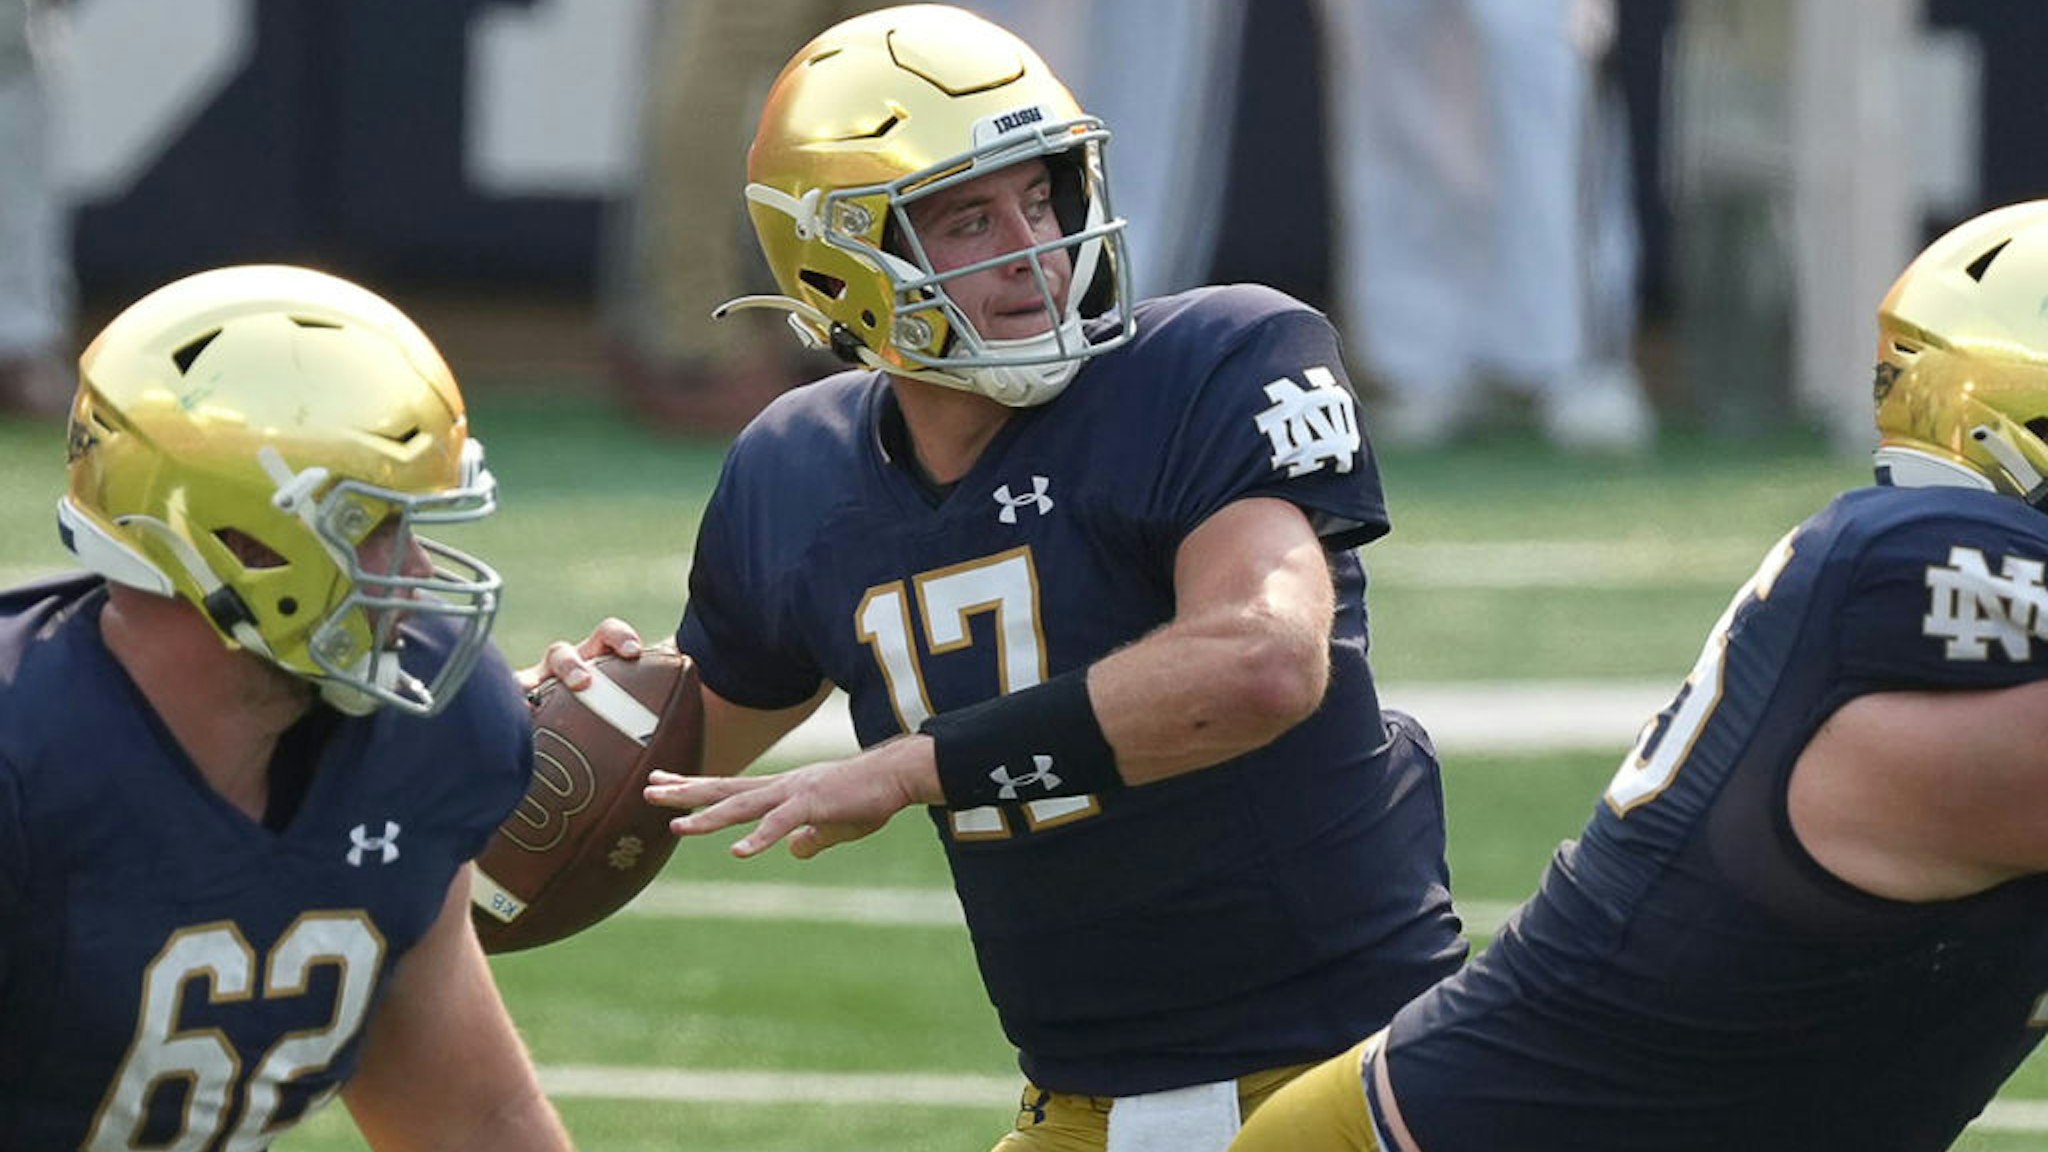 SOUTH BEND, IN - SEPTEMBER 11: Notre Dame Fighting Irish quarterback Jack Coan (17) looks to throw the football during a game between the Notre Dame Fighting Irish and the Toledo Rockets on September 11, 2021, at Notre Dame Stadium, in South Bend, In (Photo by Robin Alam/Icon Sportswire via Getty Images)